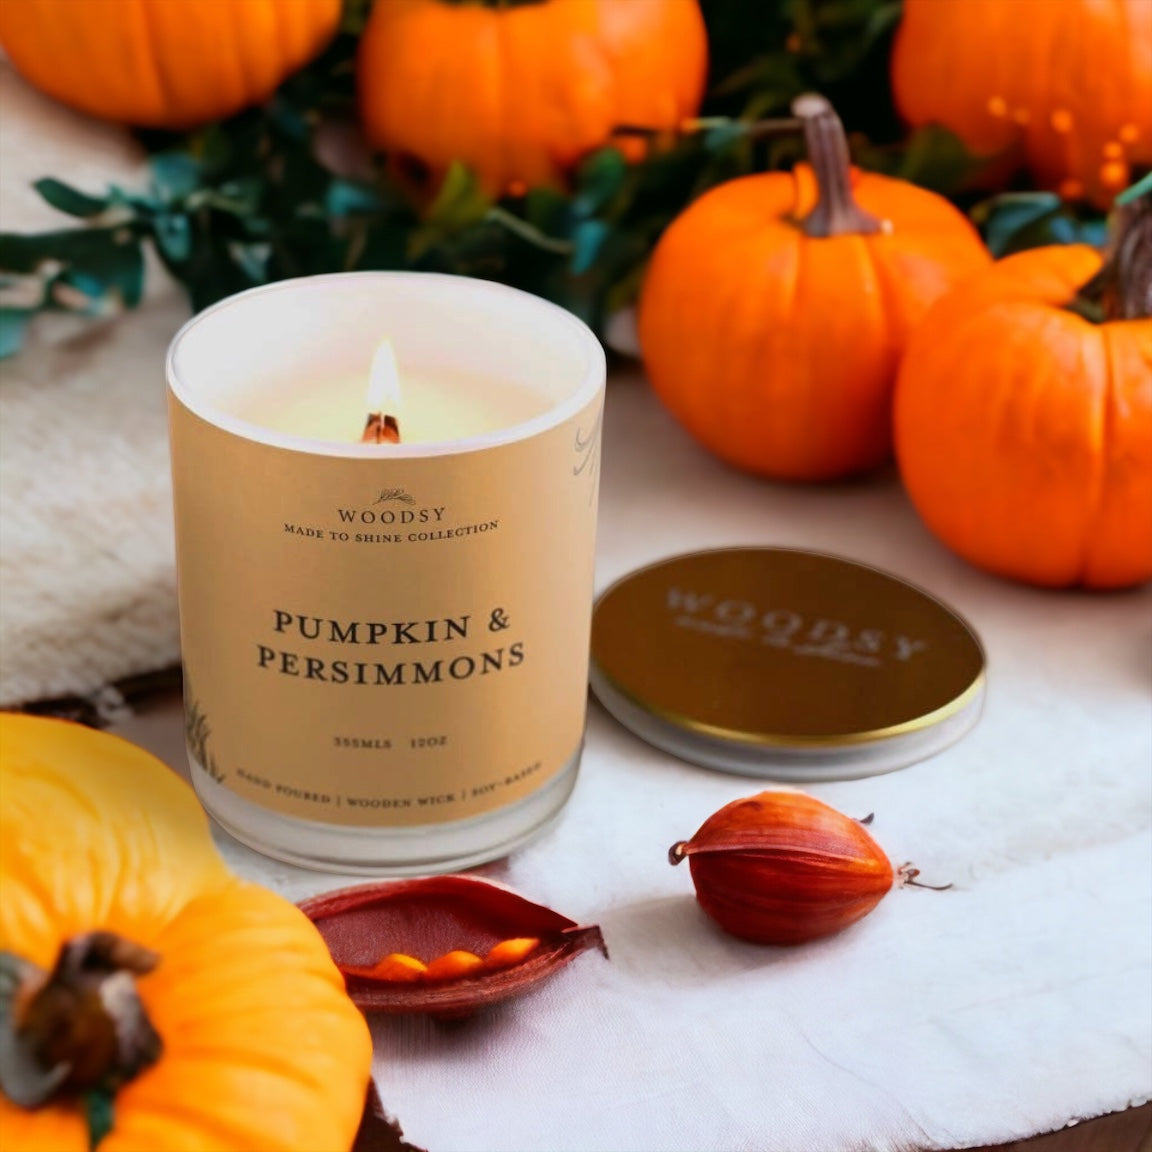 Pumpkin & Persimmons |12 oz, Gold Lid Soy Candle, Wooden Wick